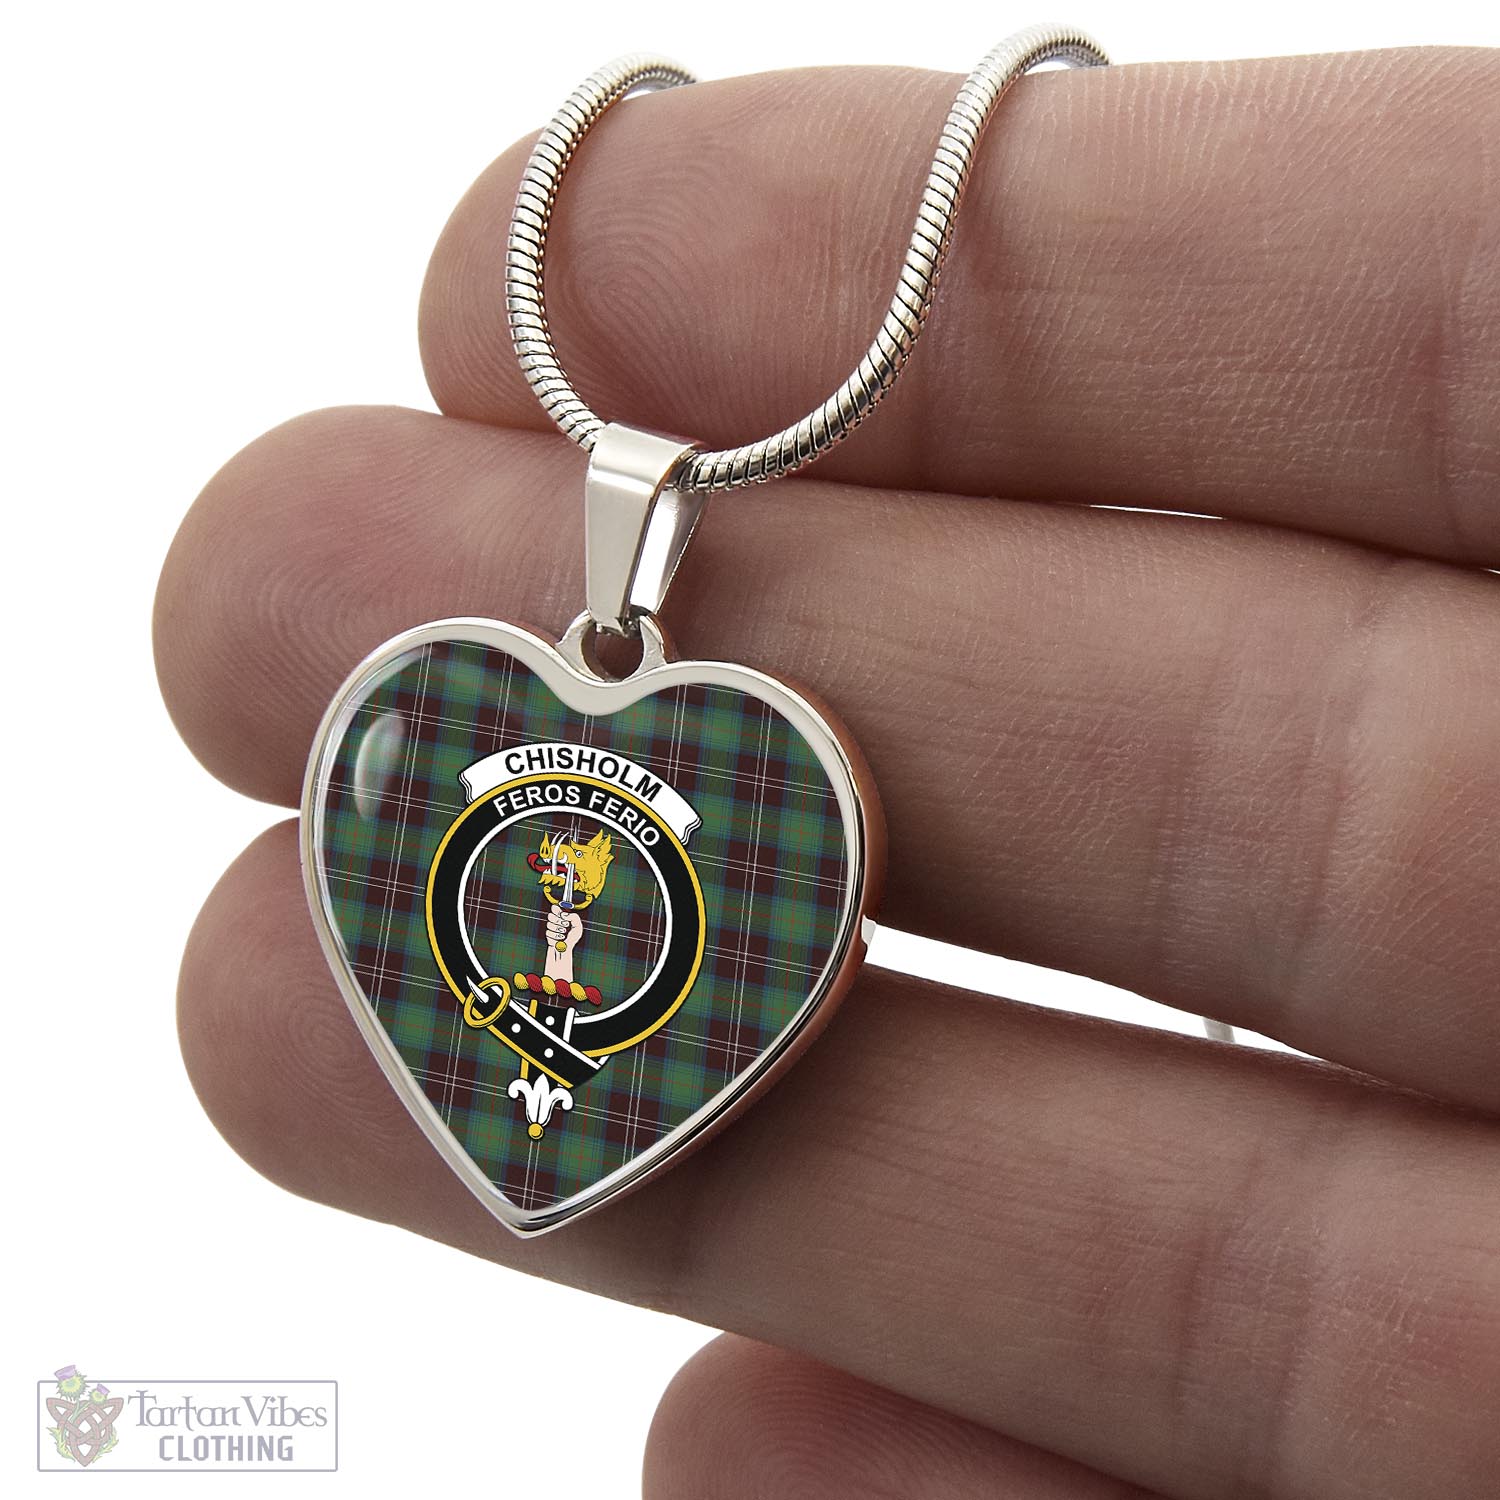 Tartan Vibes Clothing Chisholm Hunting Ancient Tartan Heart Necklace with Family Crest